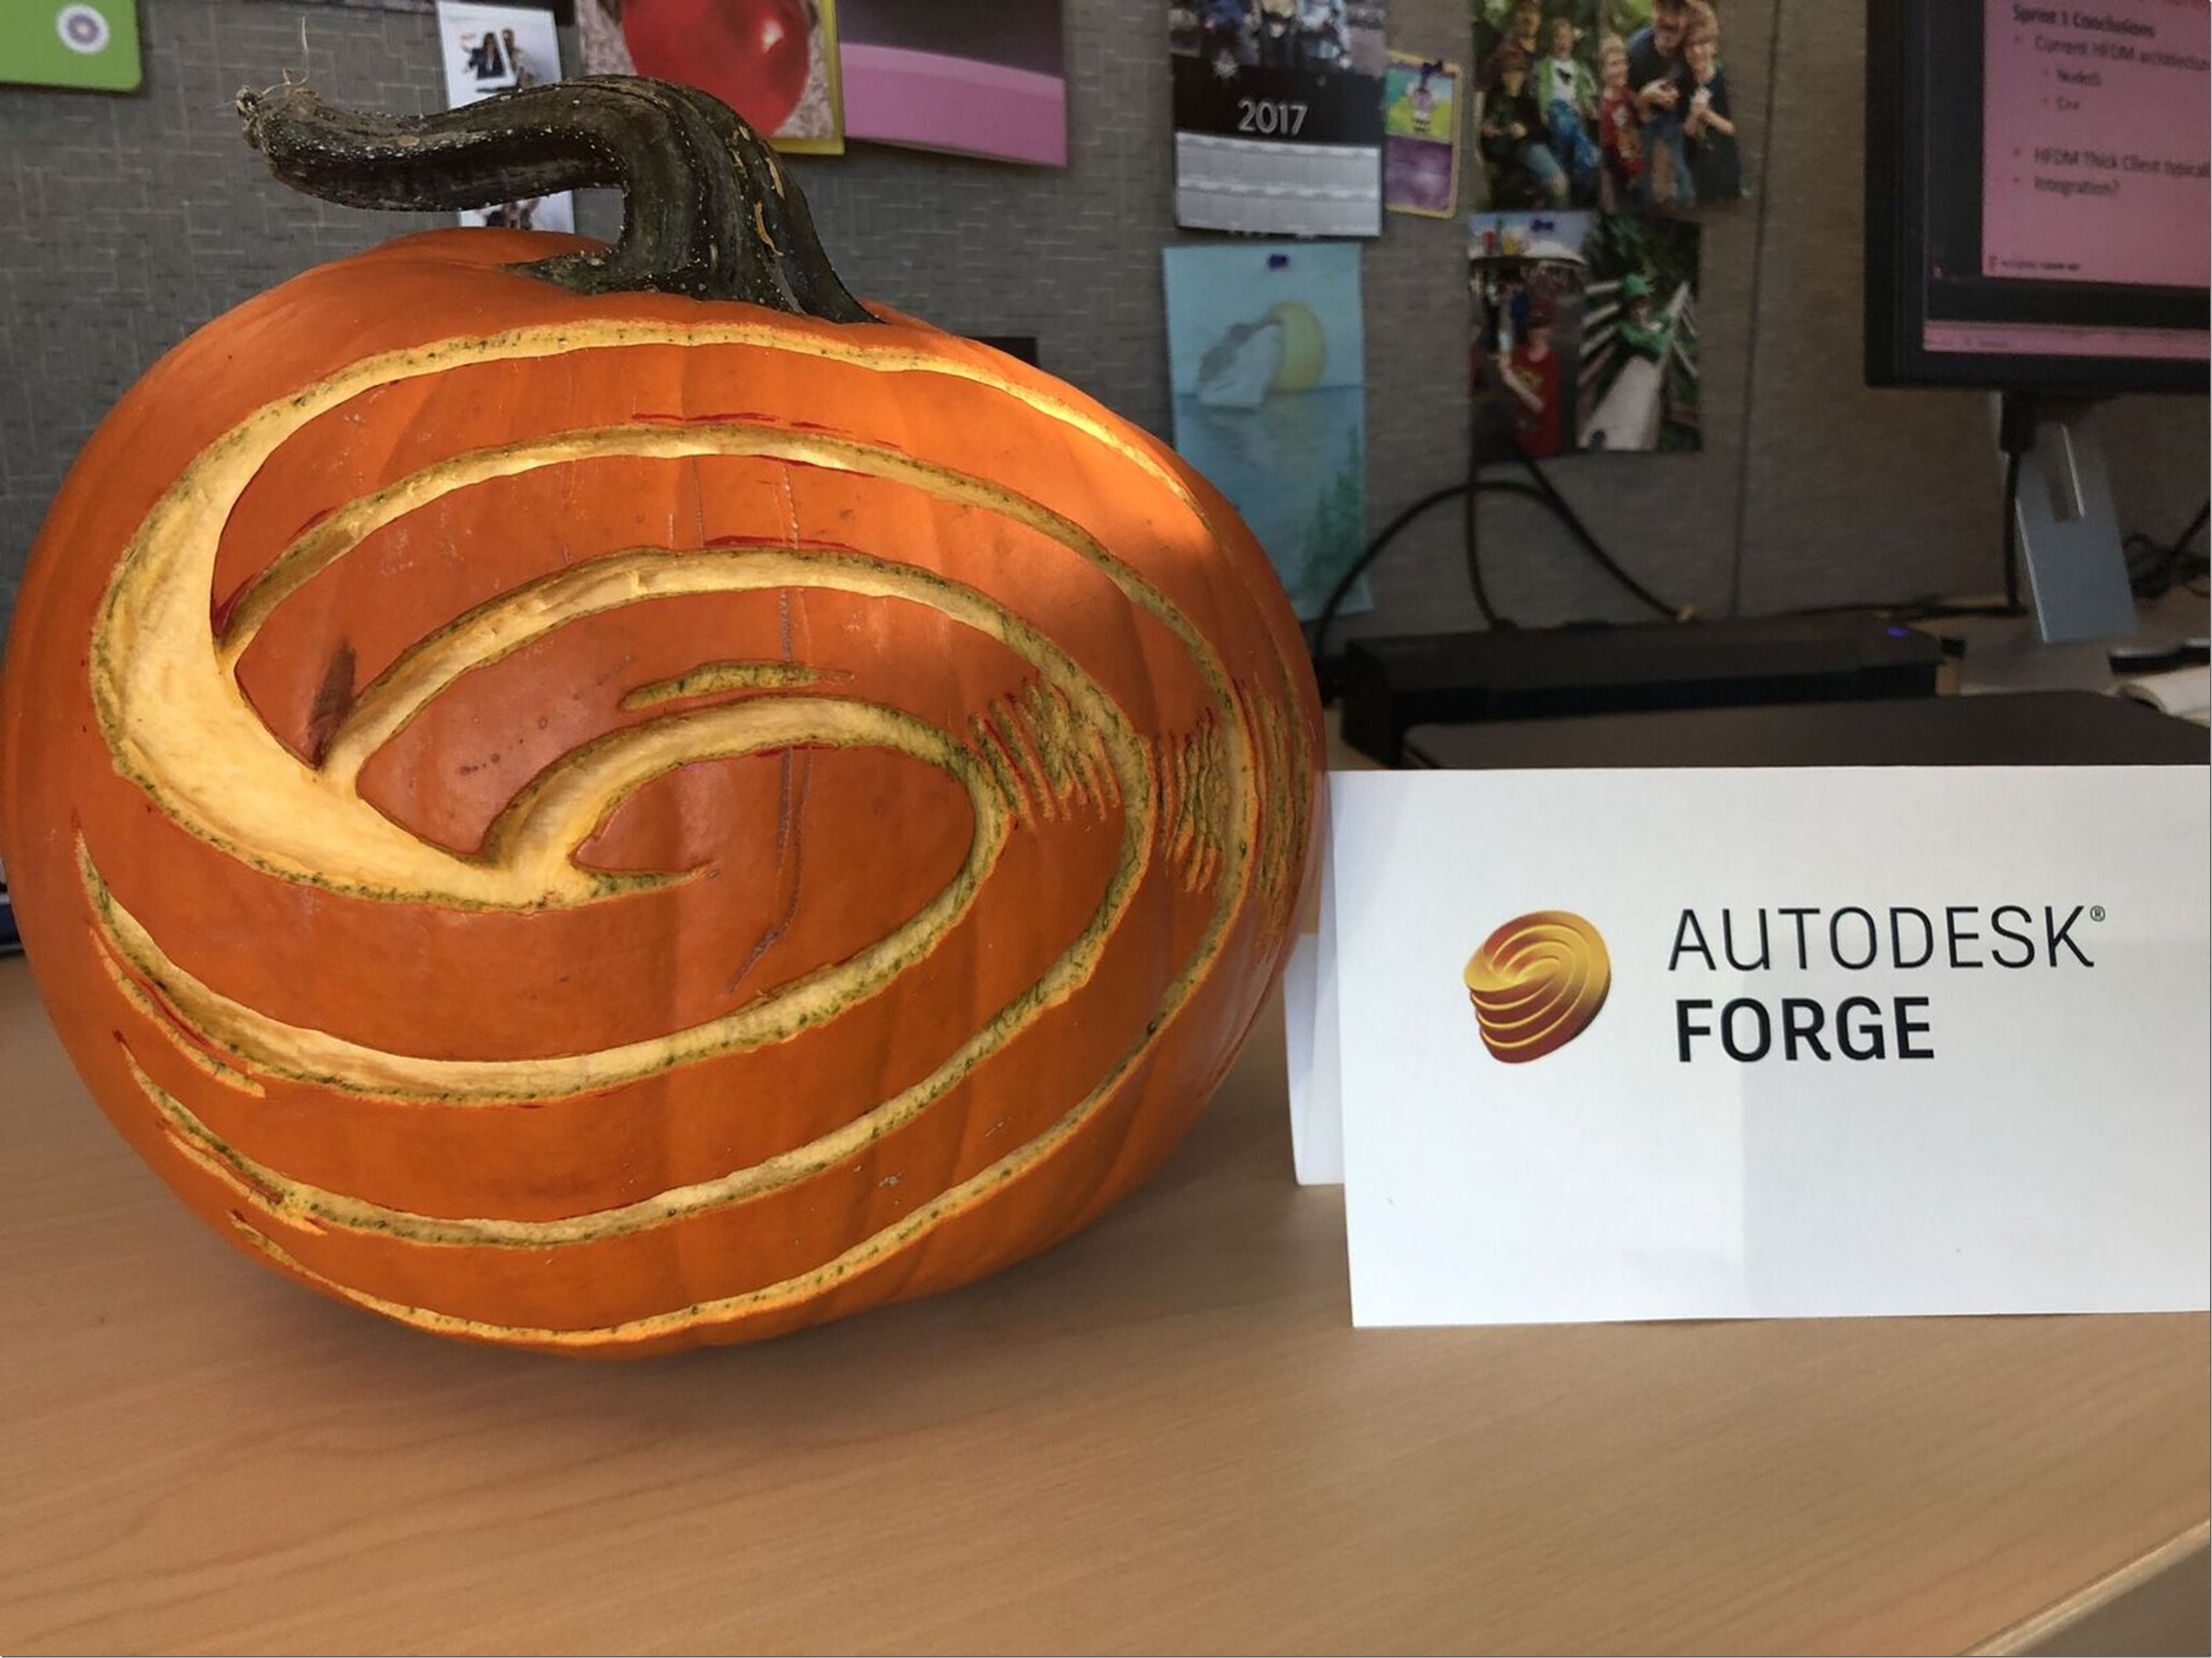 Autodesk Forge Pumpkin by Michelle Stone.